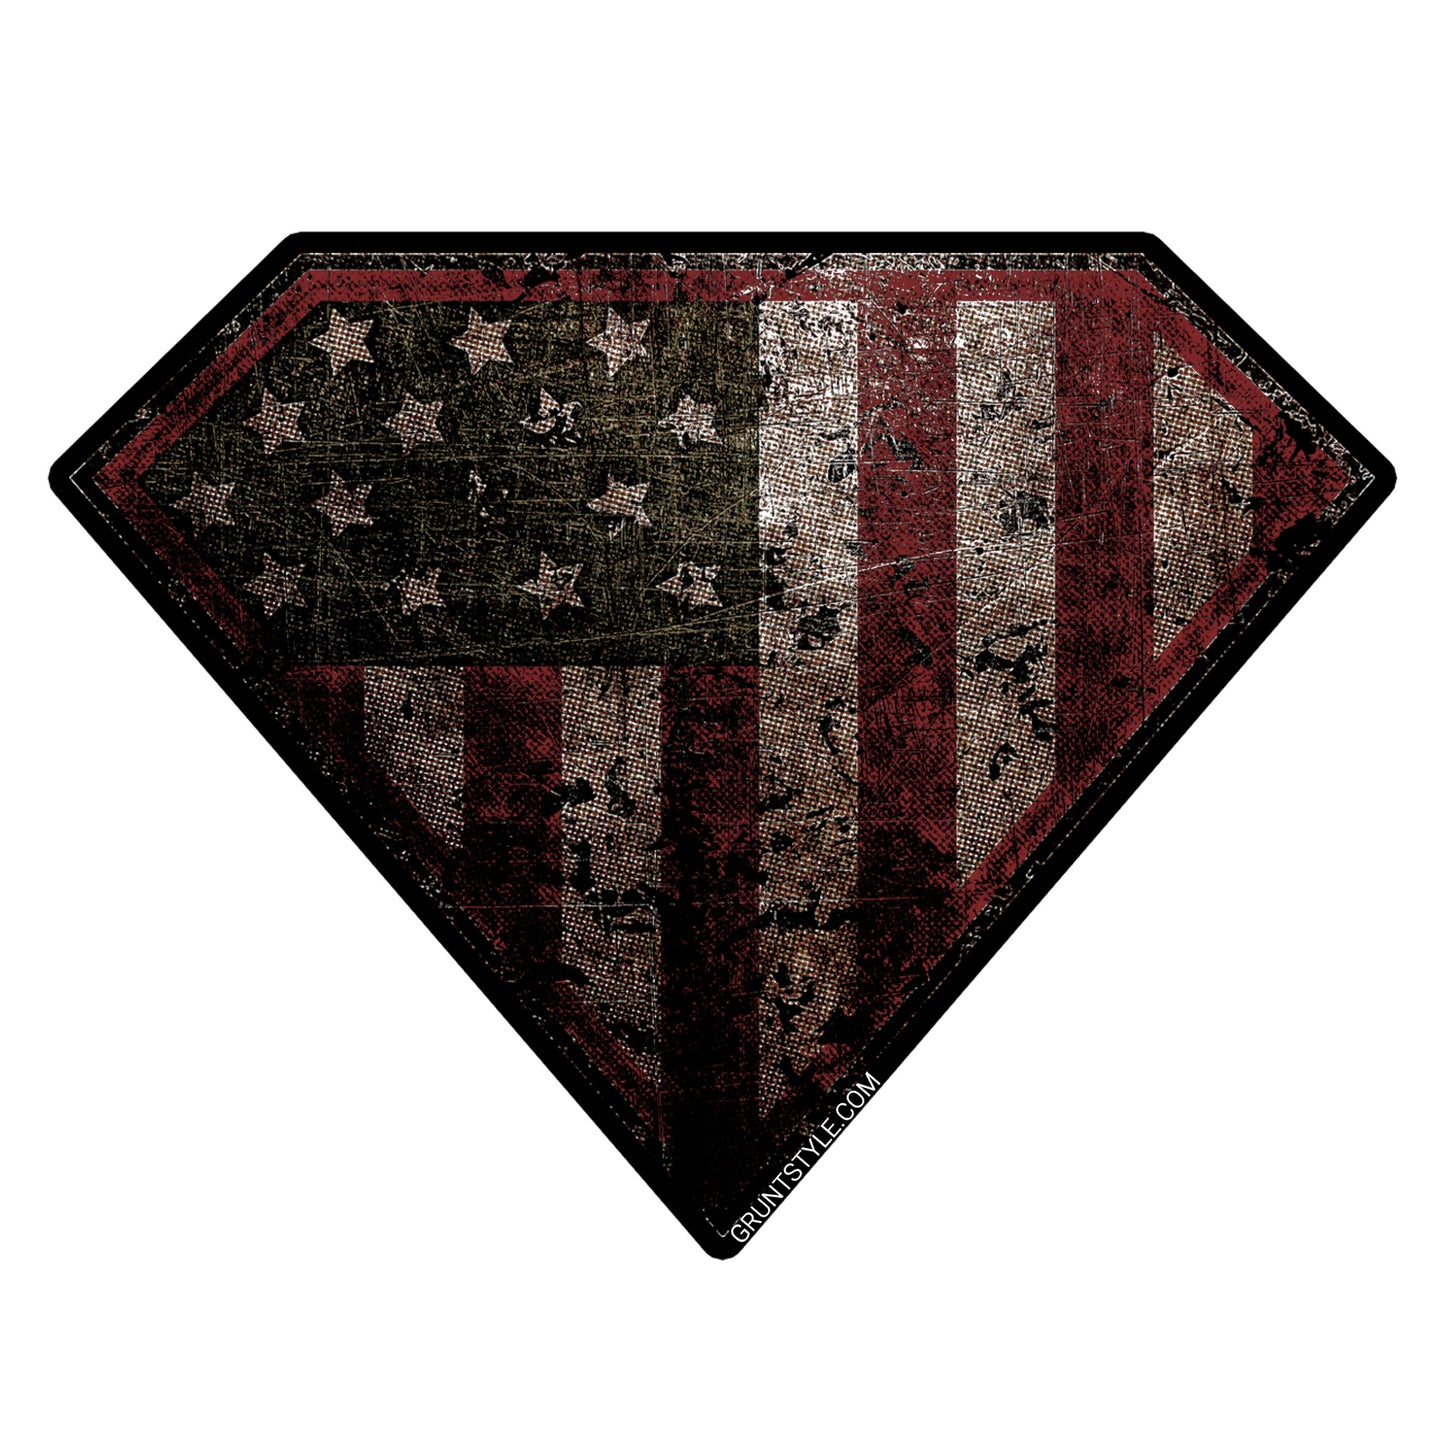 The patriotic, red, white, and blue Super Patriot 2.0 sticker | Grunt Style 